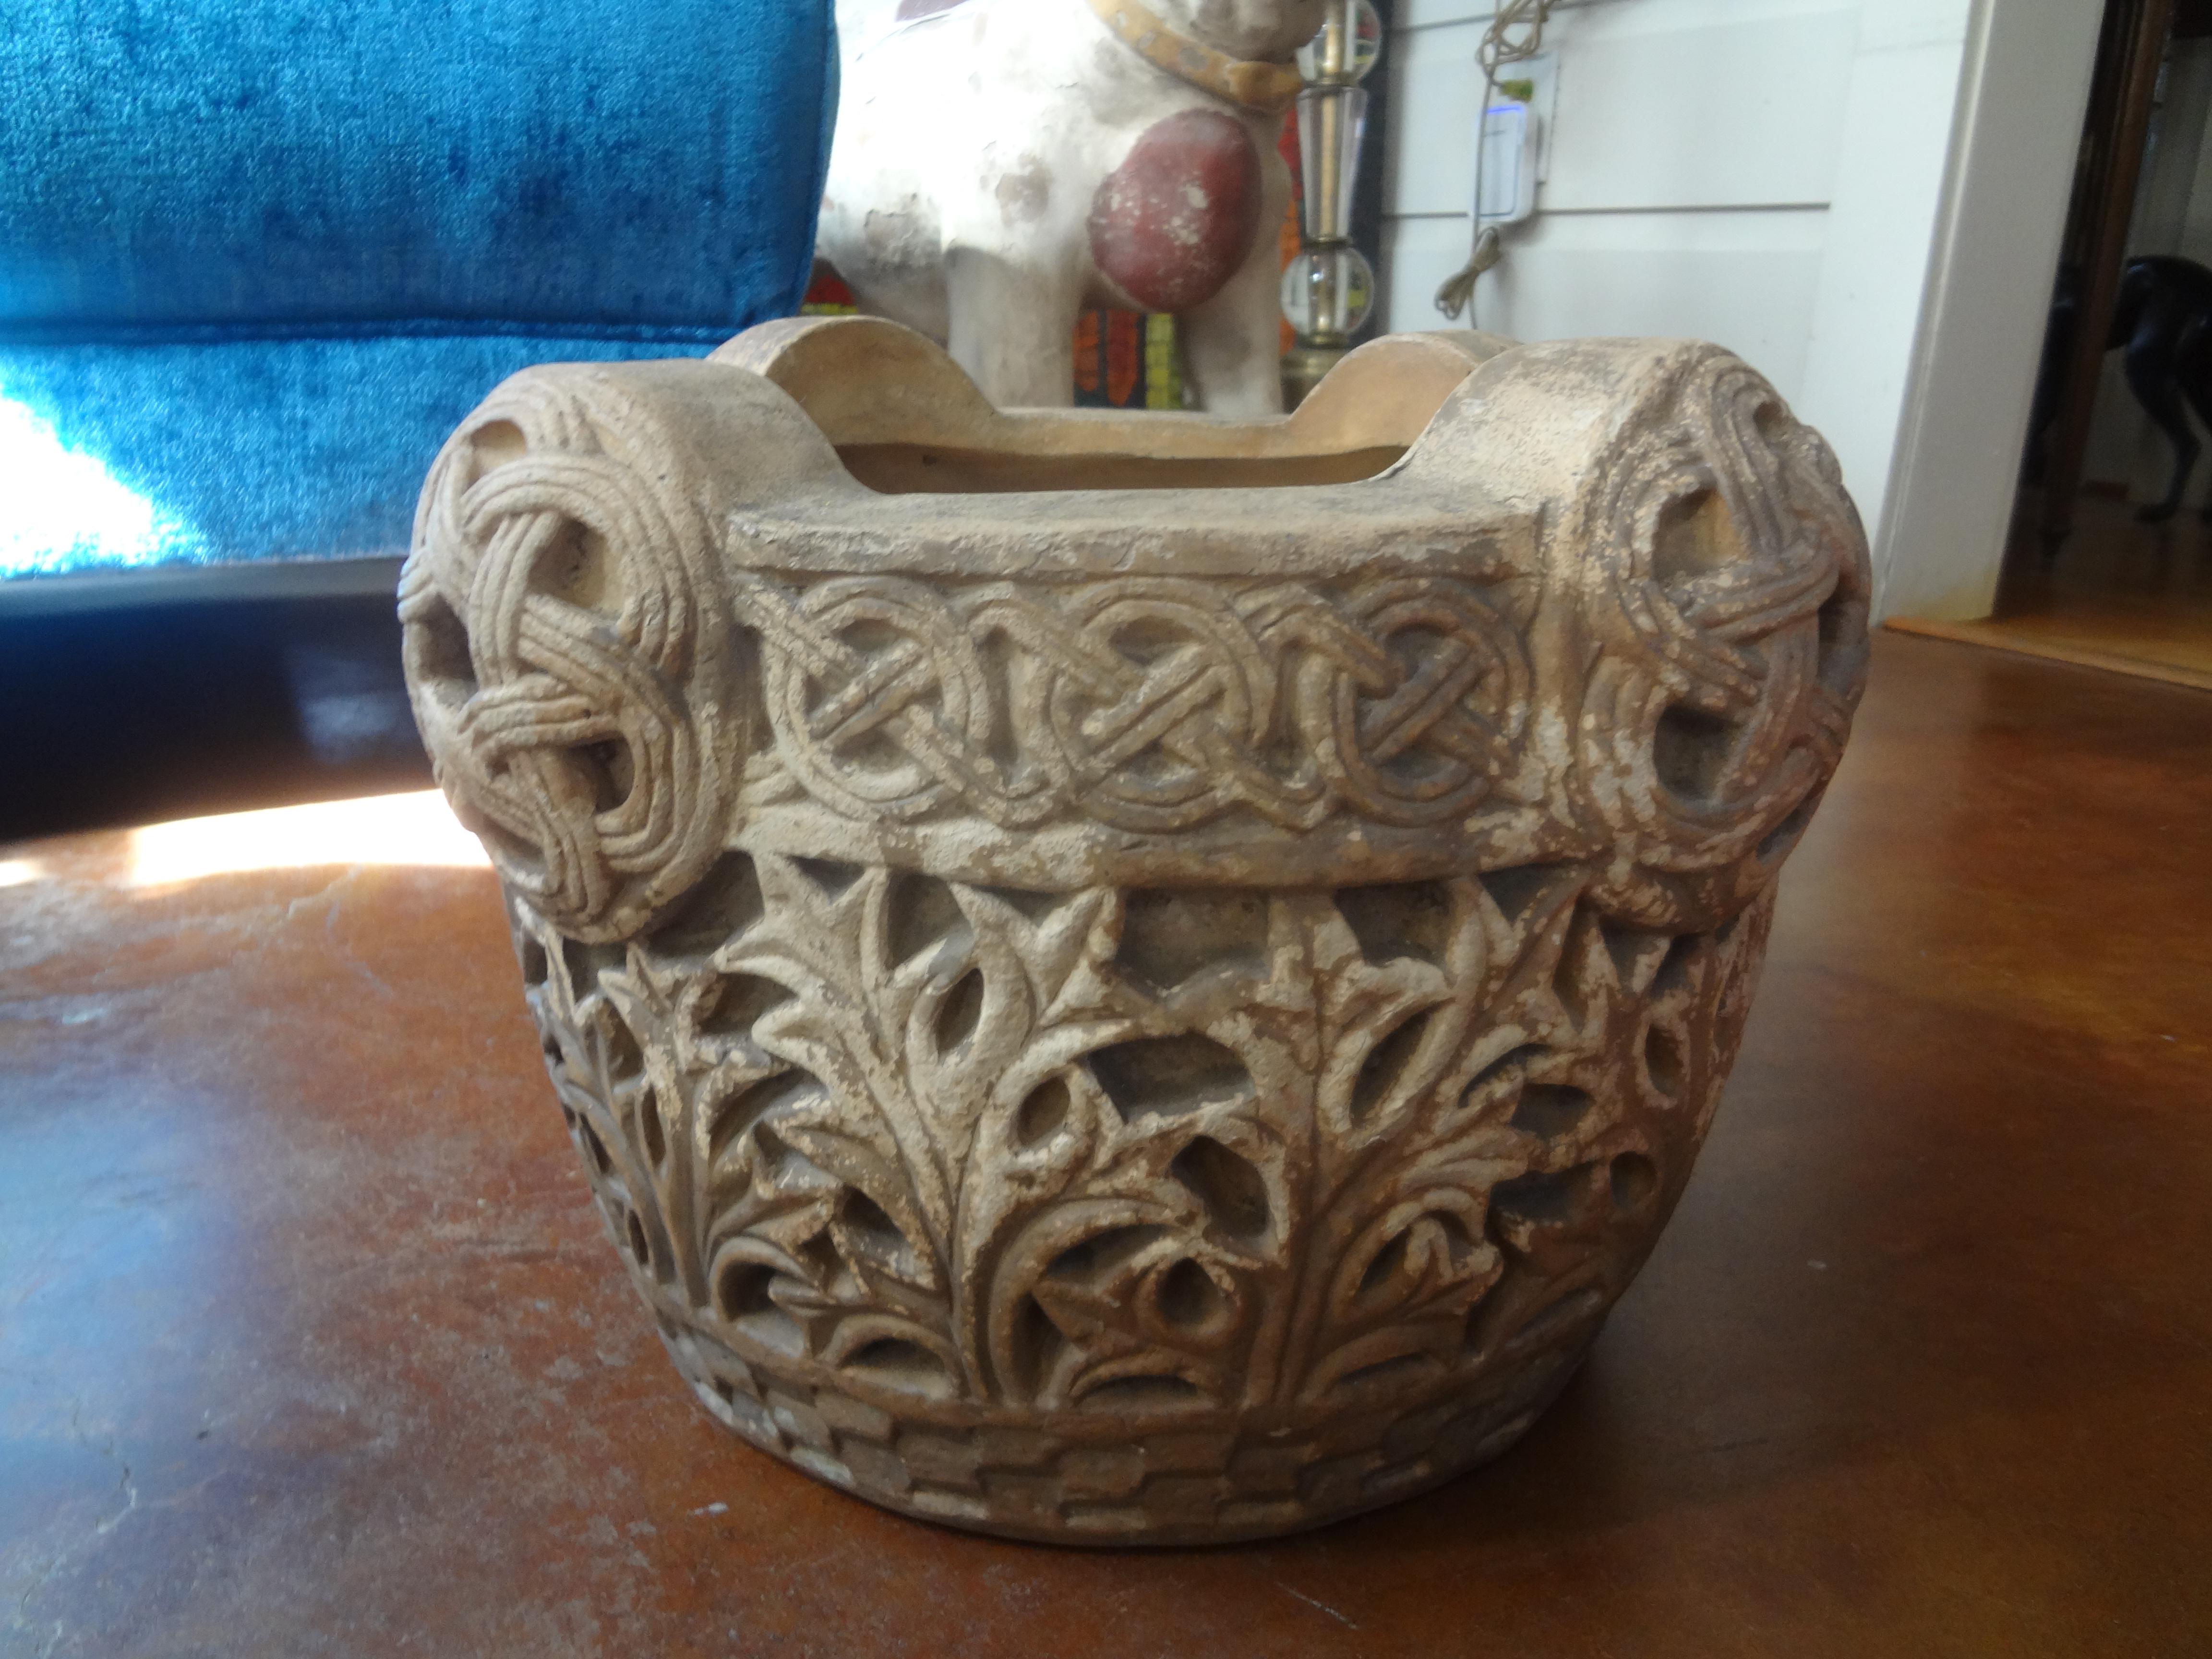 Italian terracotta planter by Dini e Cellai Signa.
Handsome Italian Islamic, Middle Eastern or Arabesque style Terra Cotta Planter, Jardiniere or Cachepot, circa 1920. 
This stunning garden planter would look great on a coffee table or dining